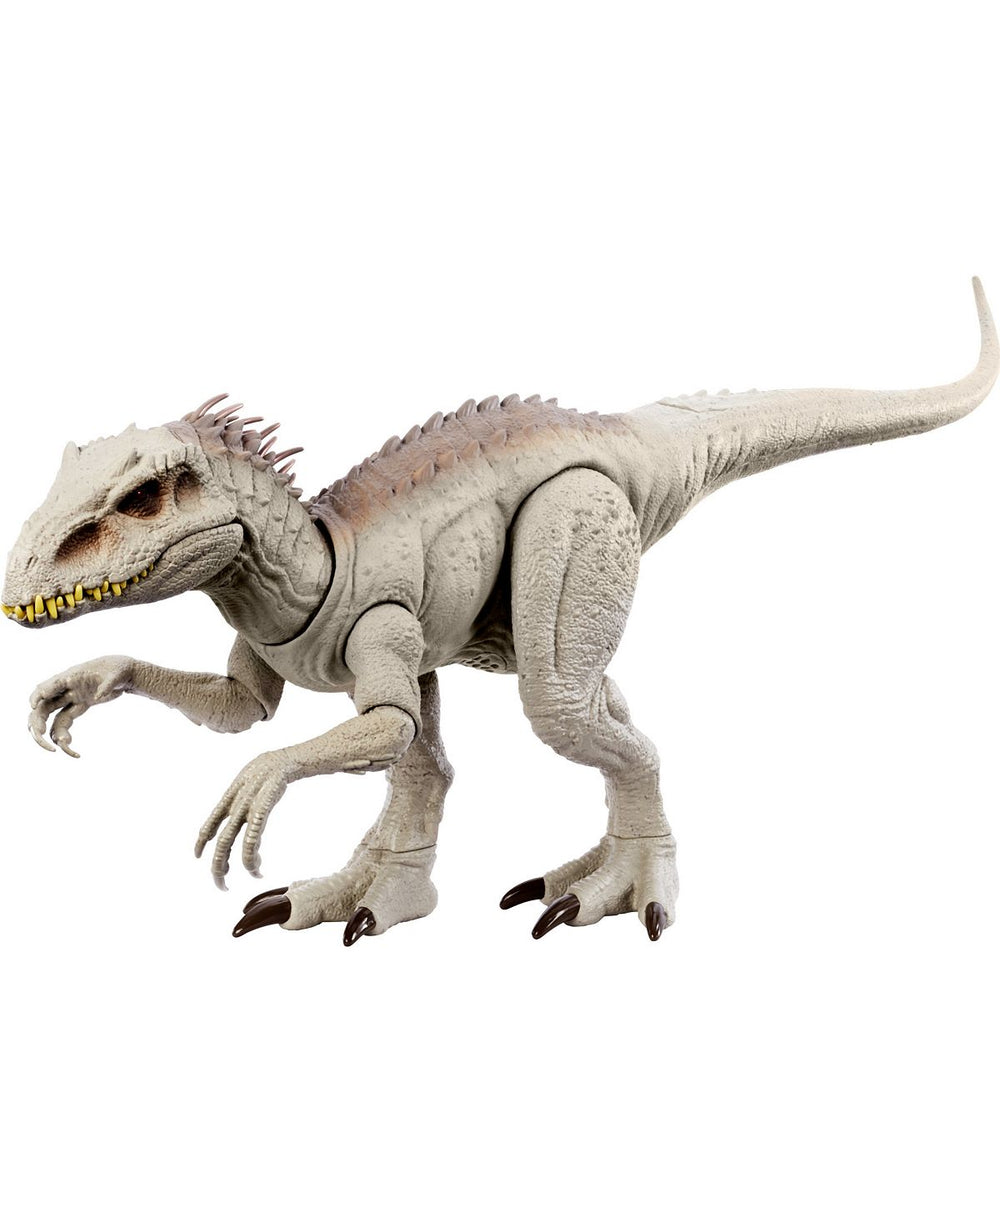 Jurassic World 21-inch Indominus Rex Action Figure with Camouflage and Sound Effects